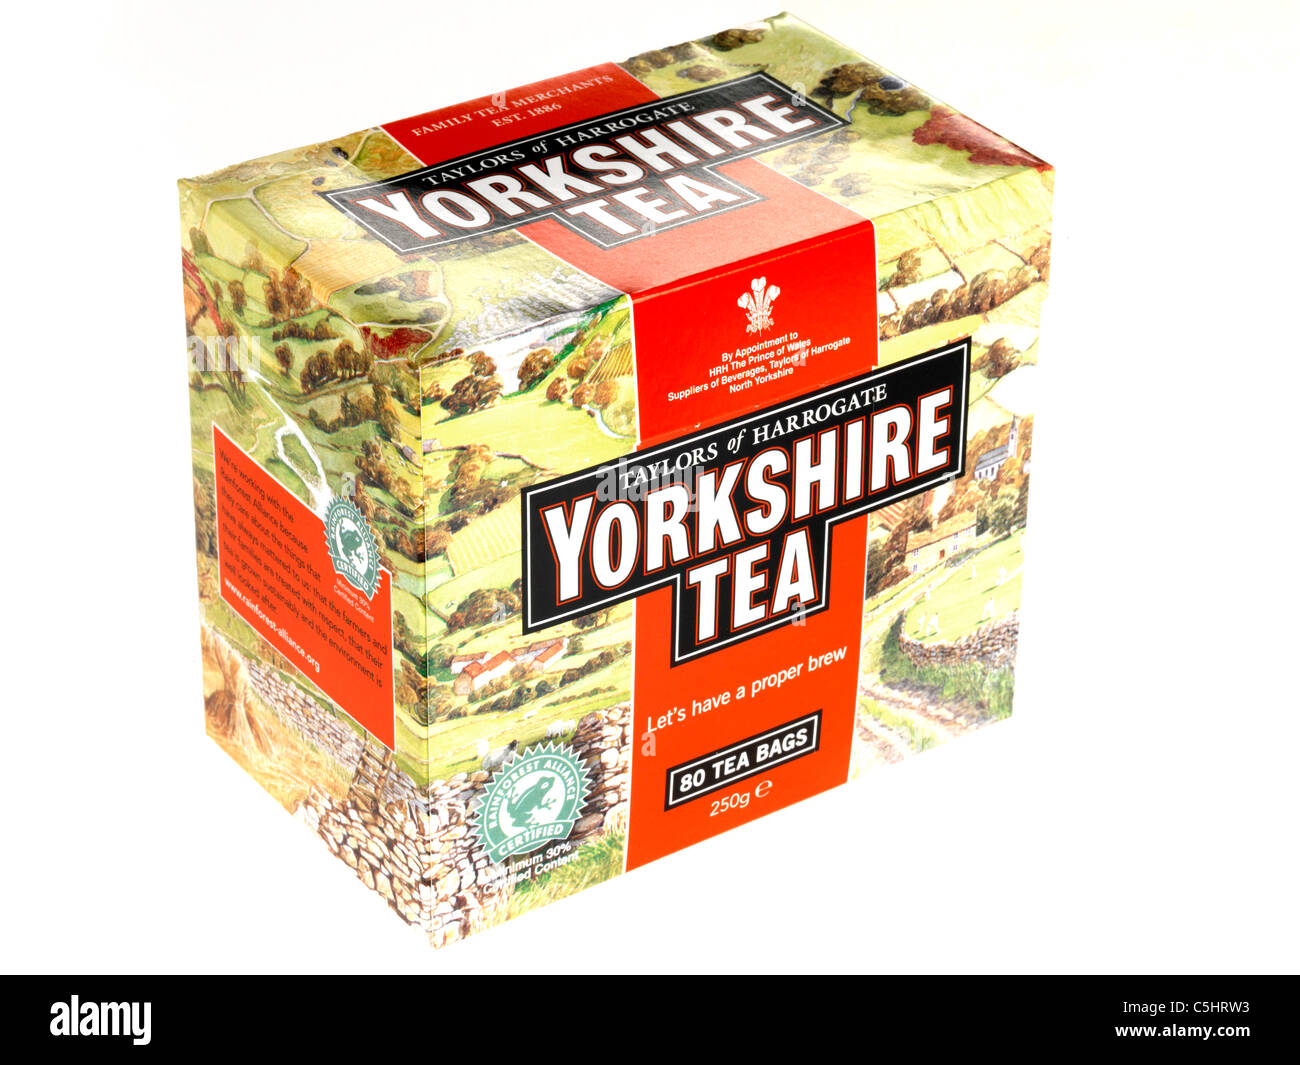 Branded Carton Of Yorkshire Tea Bags Isolated Against A White Background With A Clipping Path And No People Stock Photo